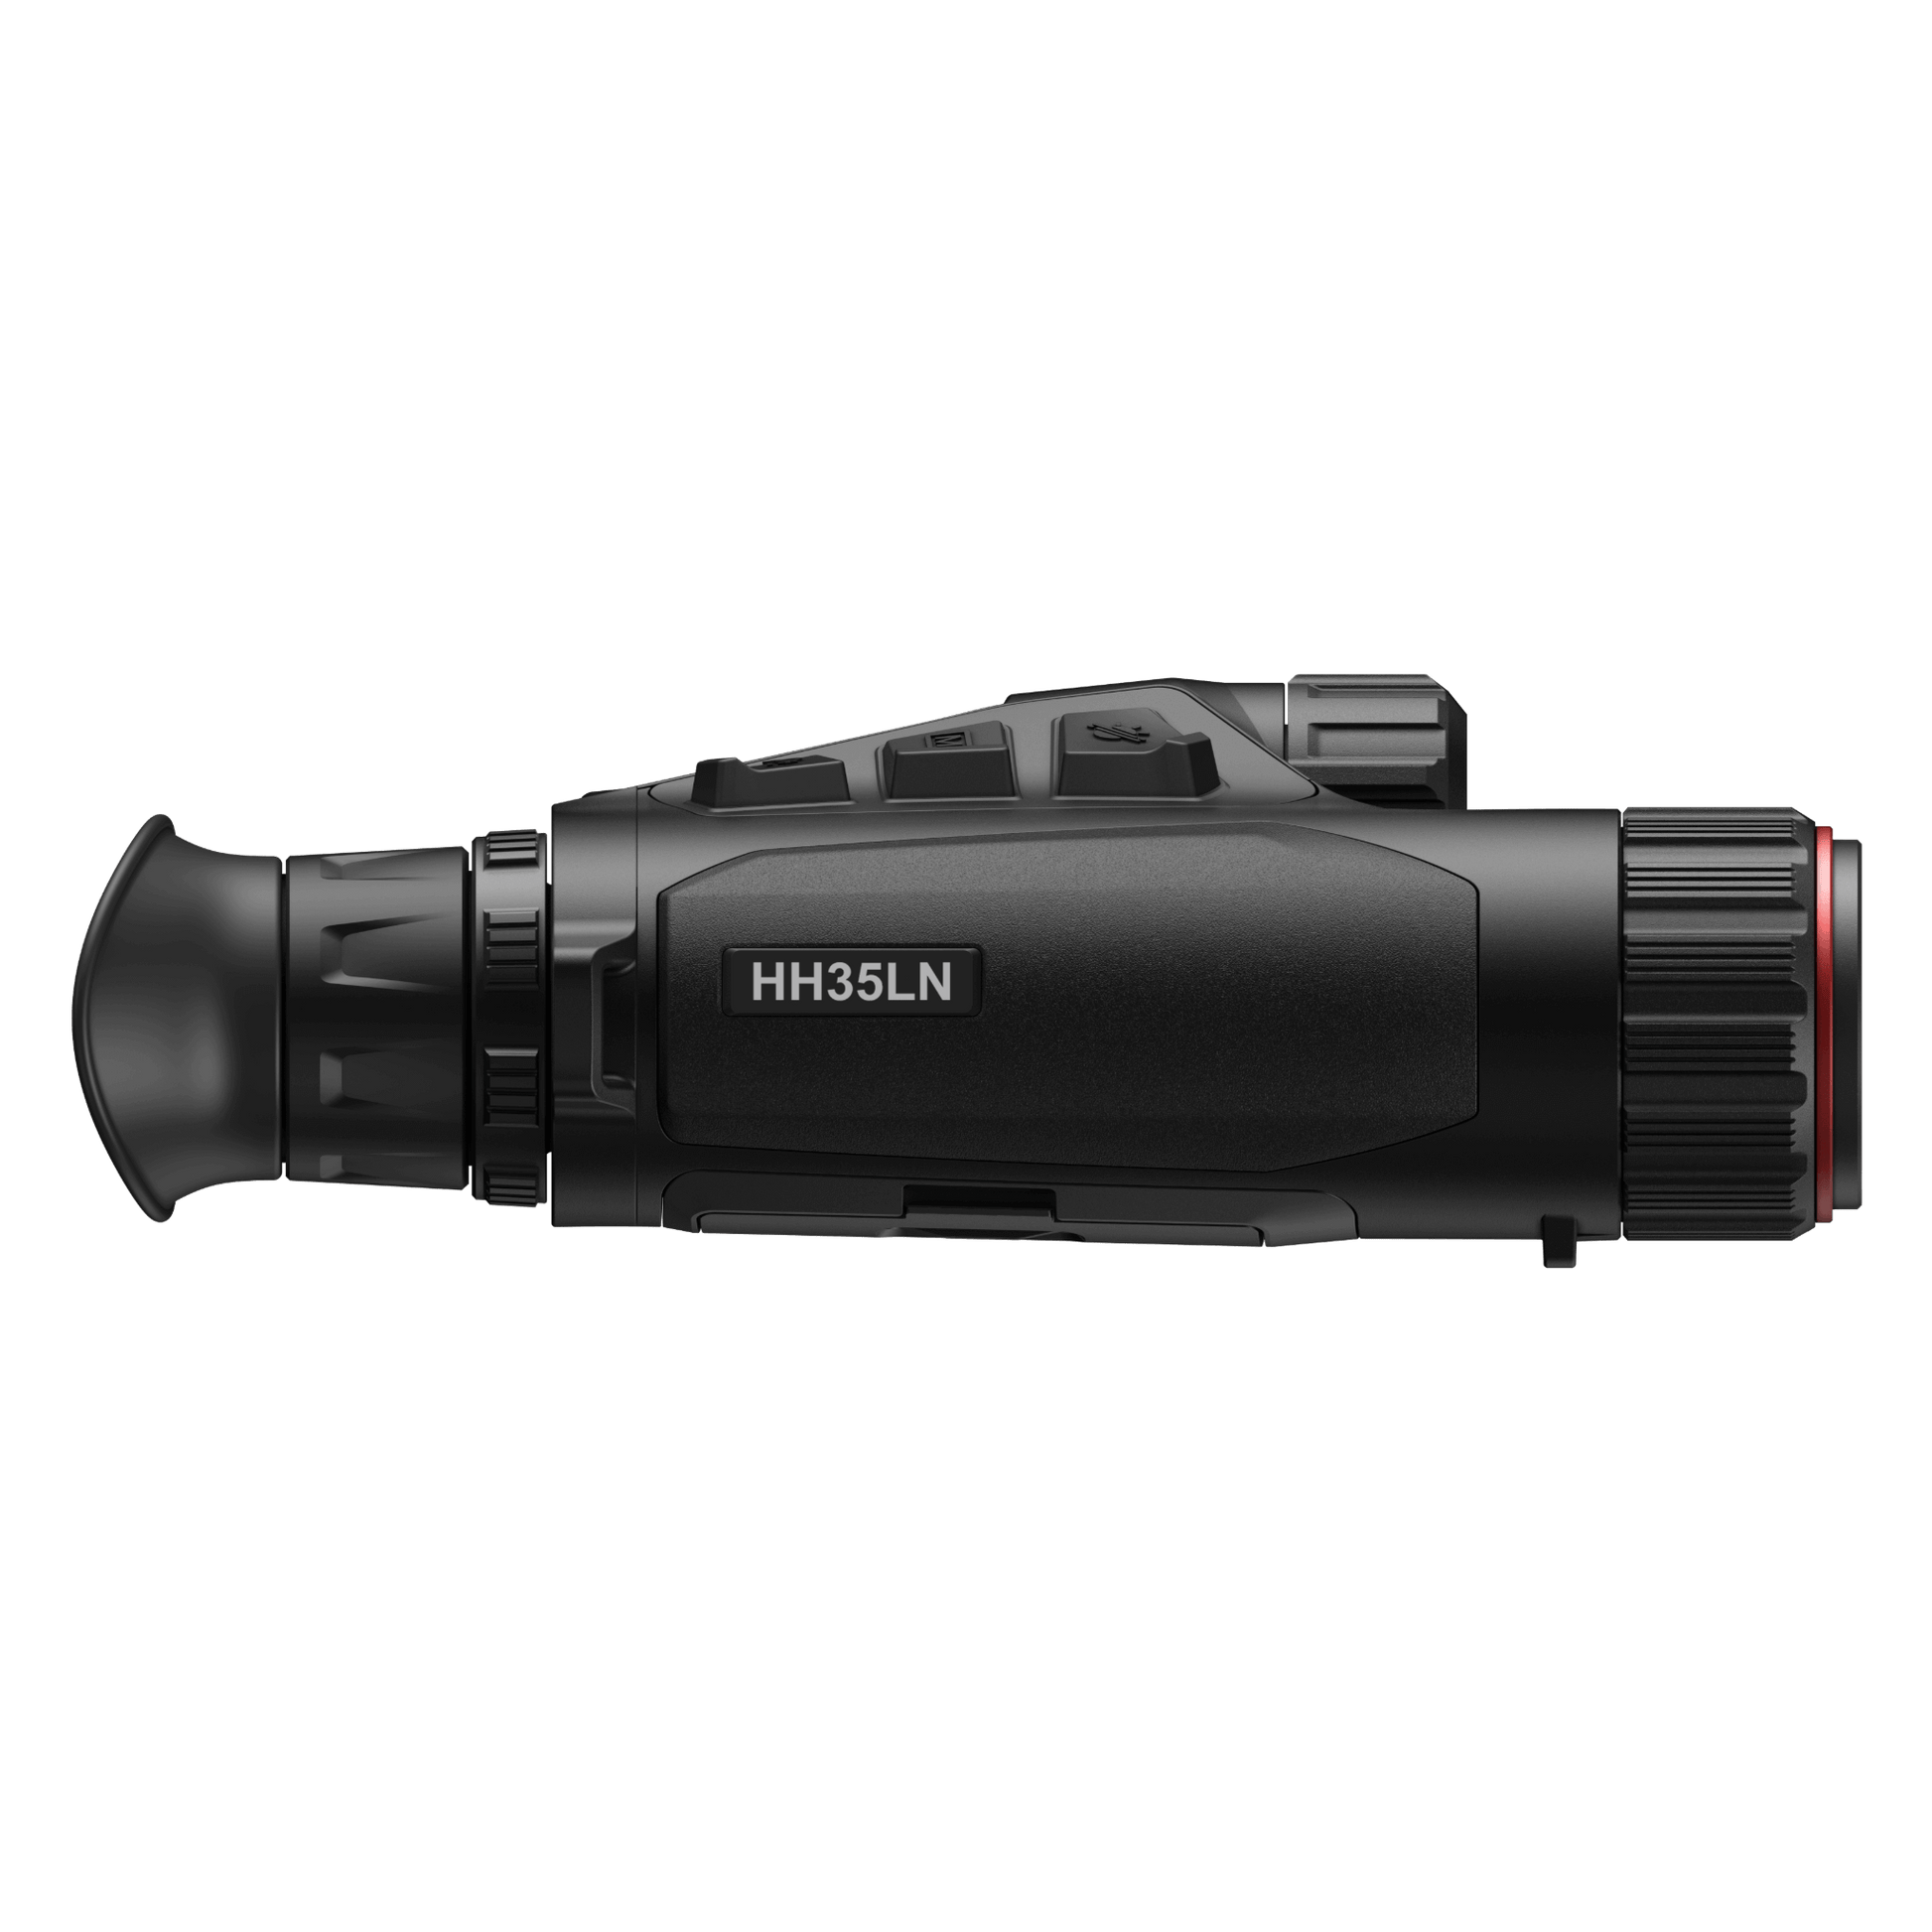 HikMicro Habrok HH35LN Multi-Spectrum Binoculars with Thermal Imaging - Right Side View